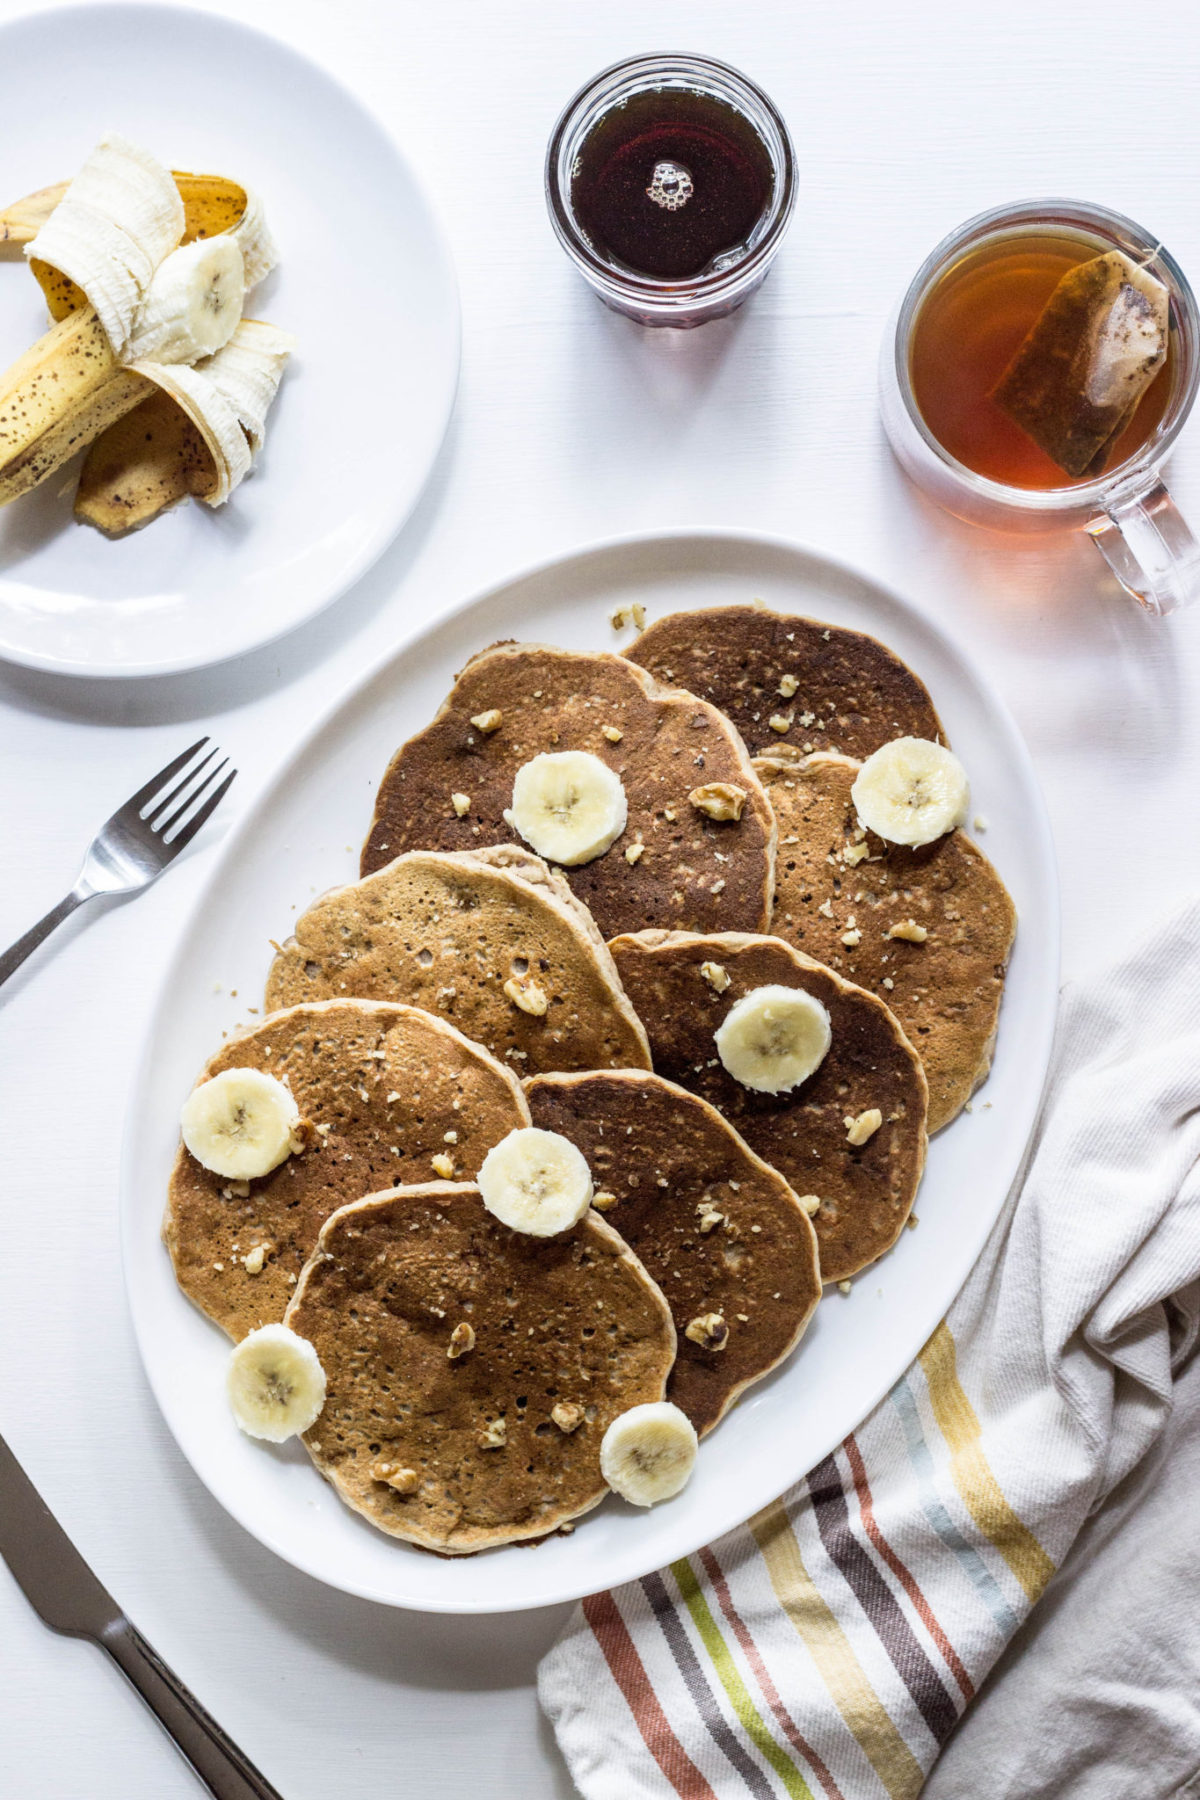 Whole Wheat Banana Nut Pancakes arranged on a serving platter.